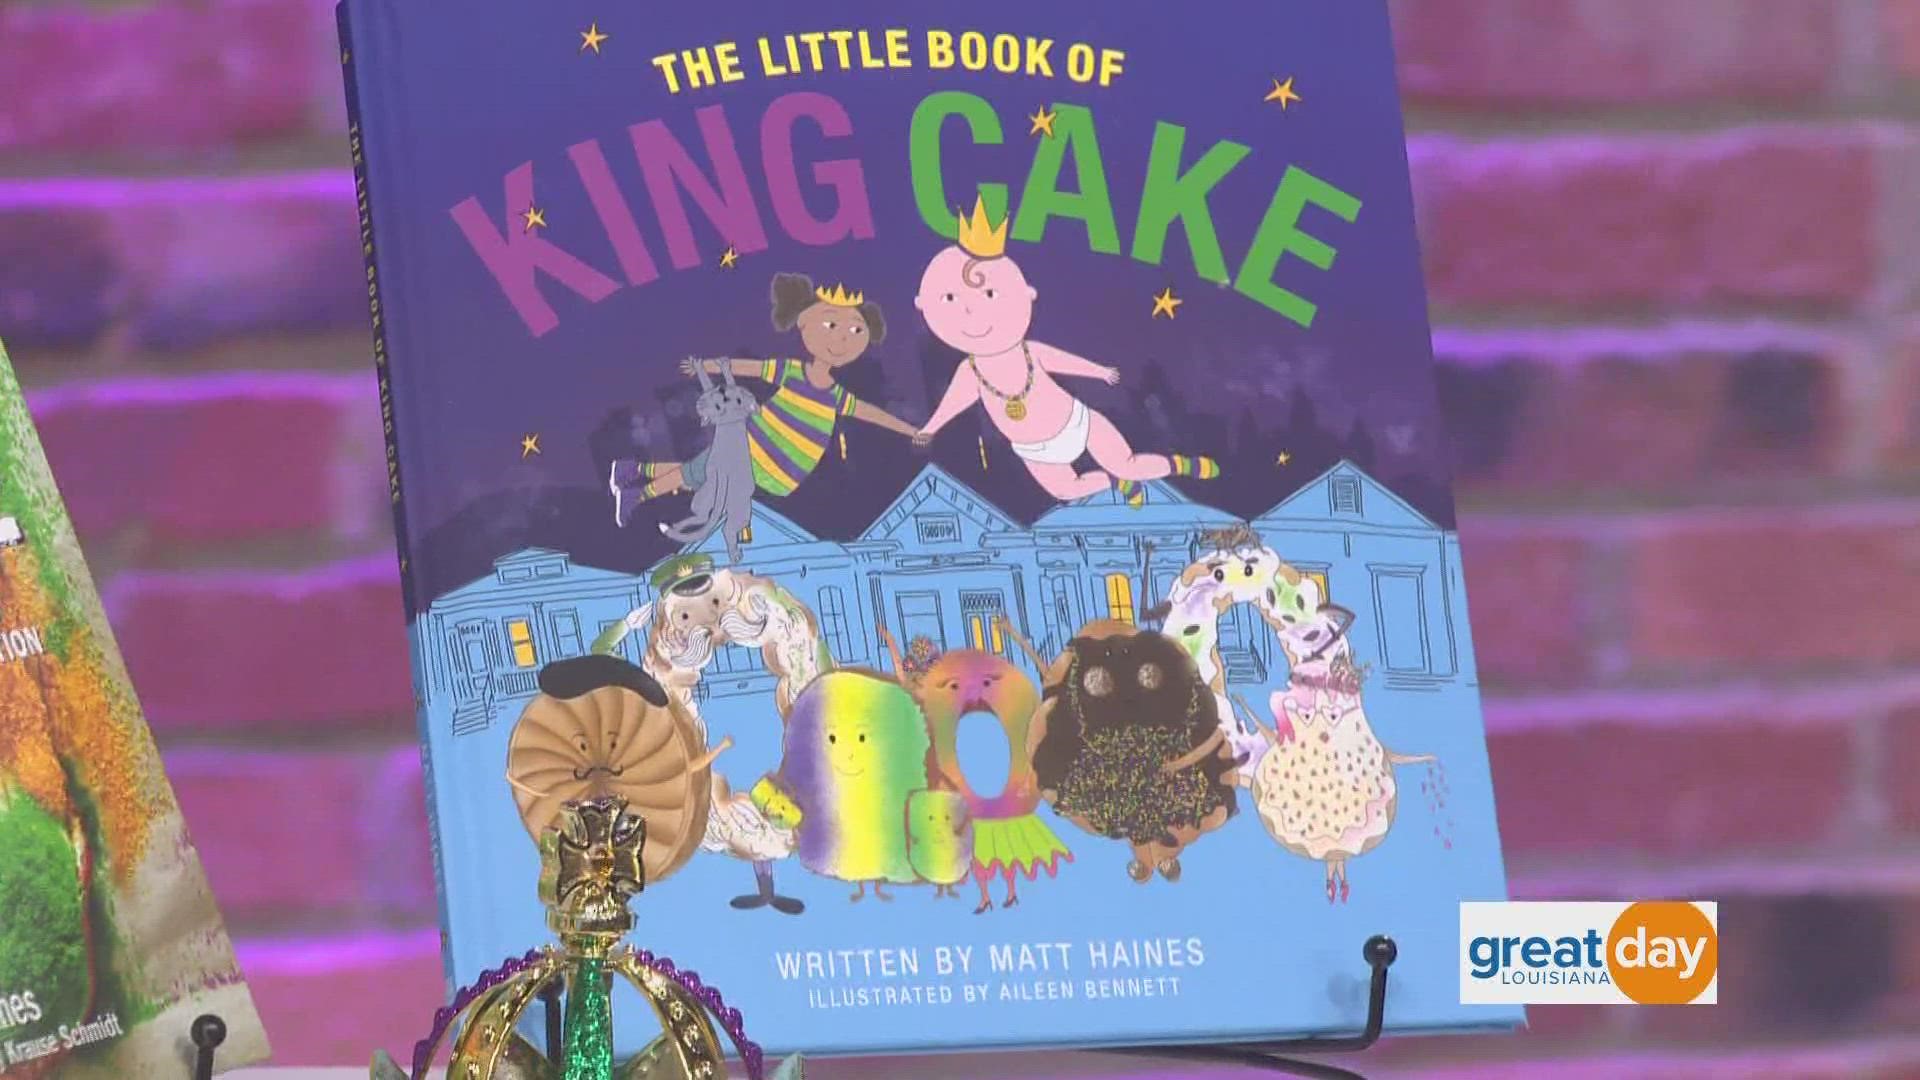 Author, Matt Haines, shares his newest book "The Little Book of King Cake", a fun read for kids about the history of king cake.